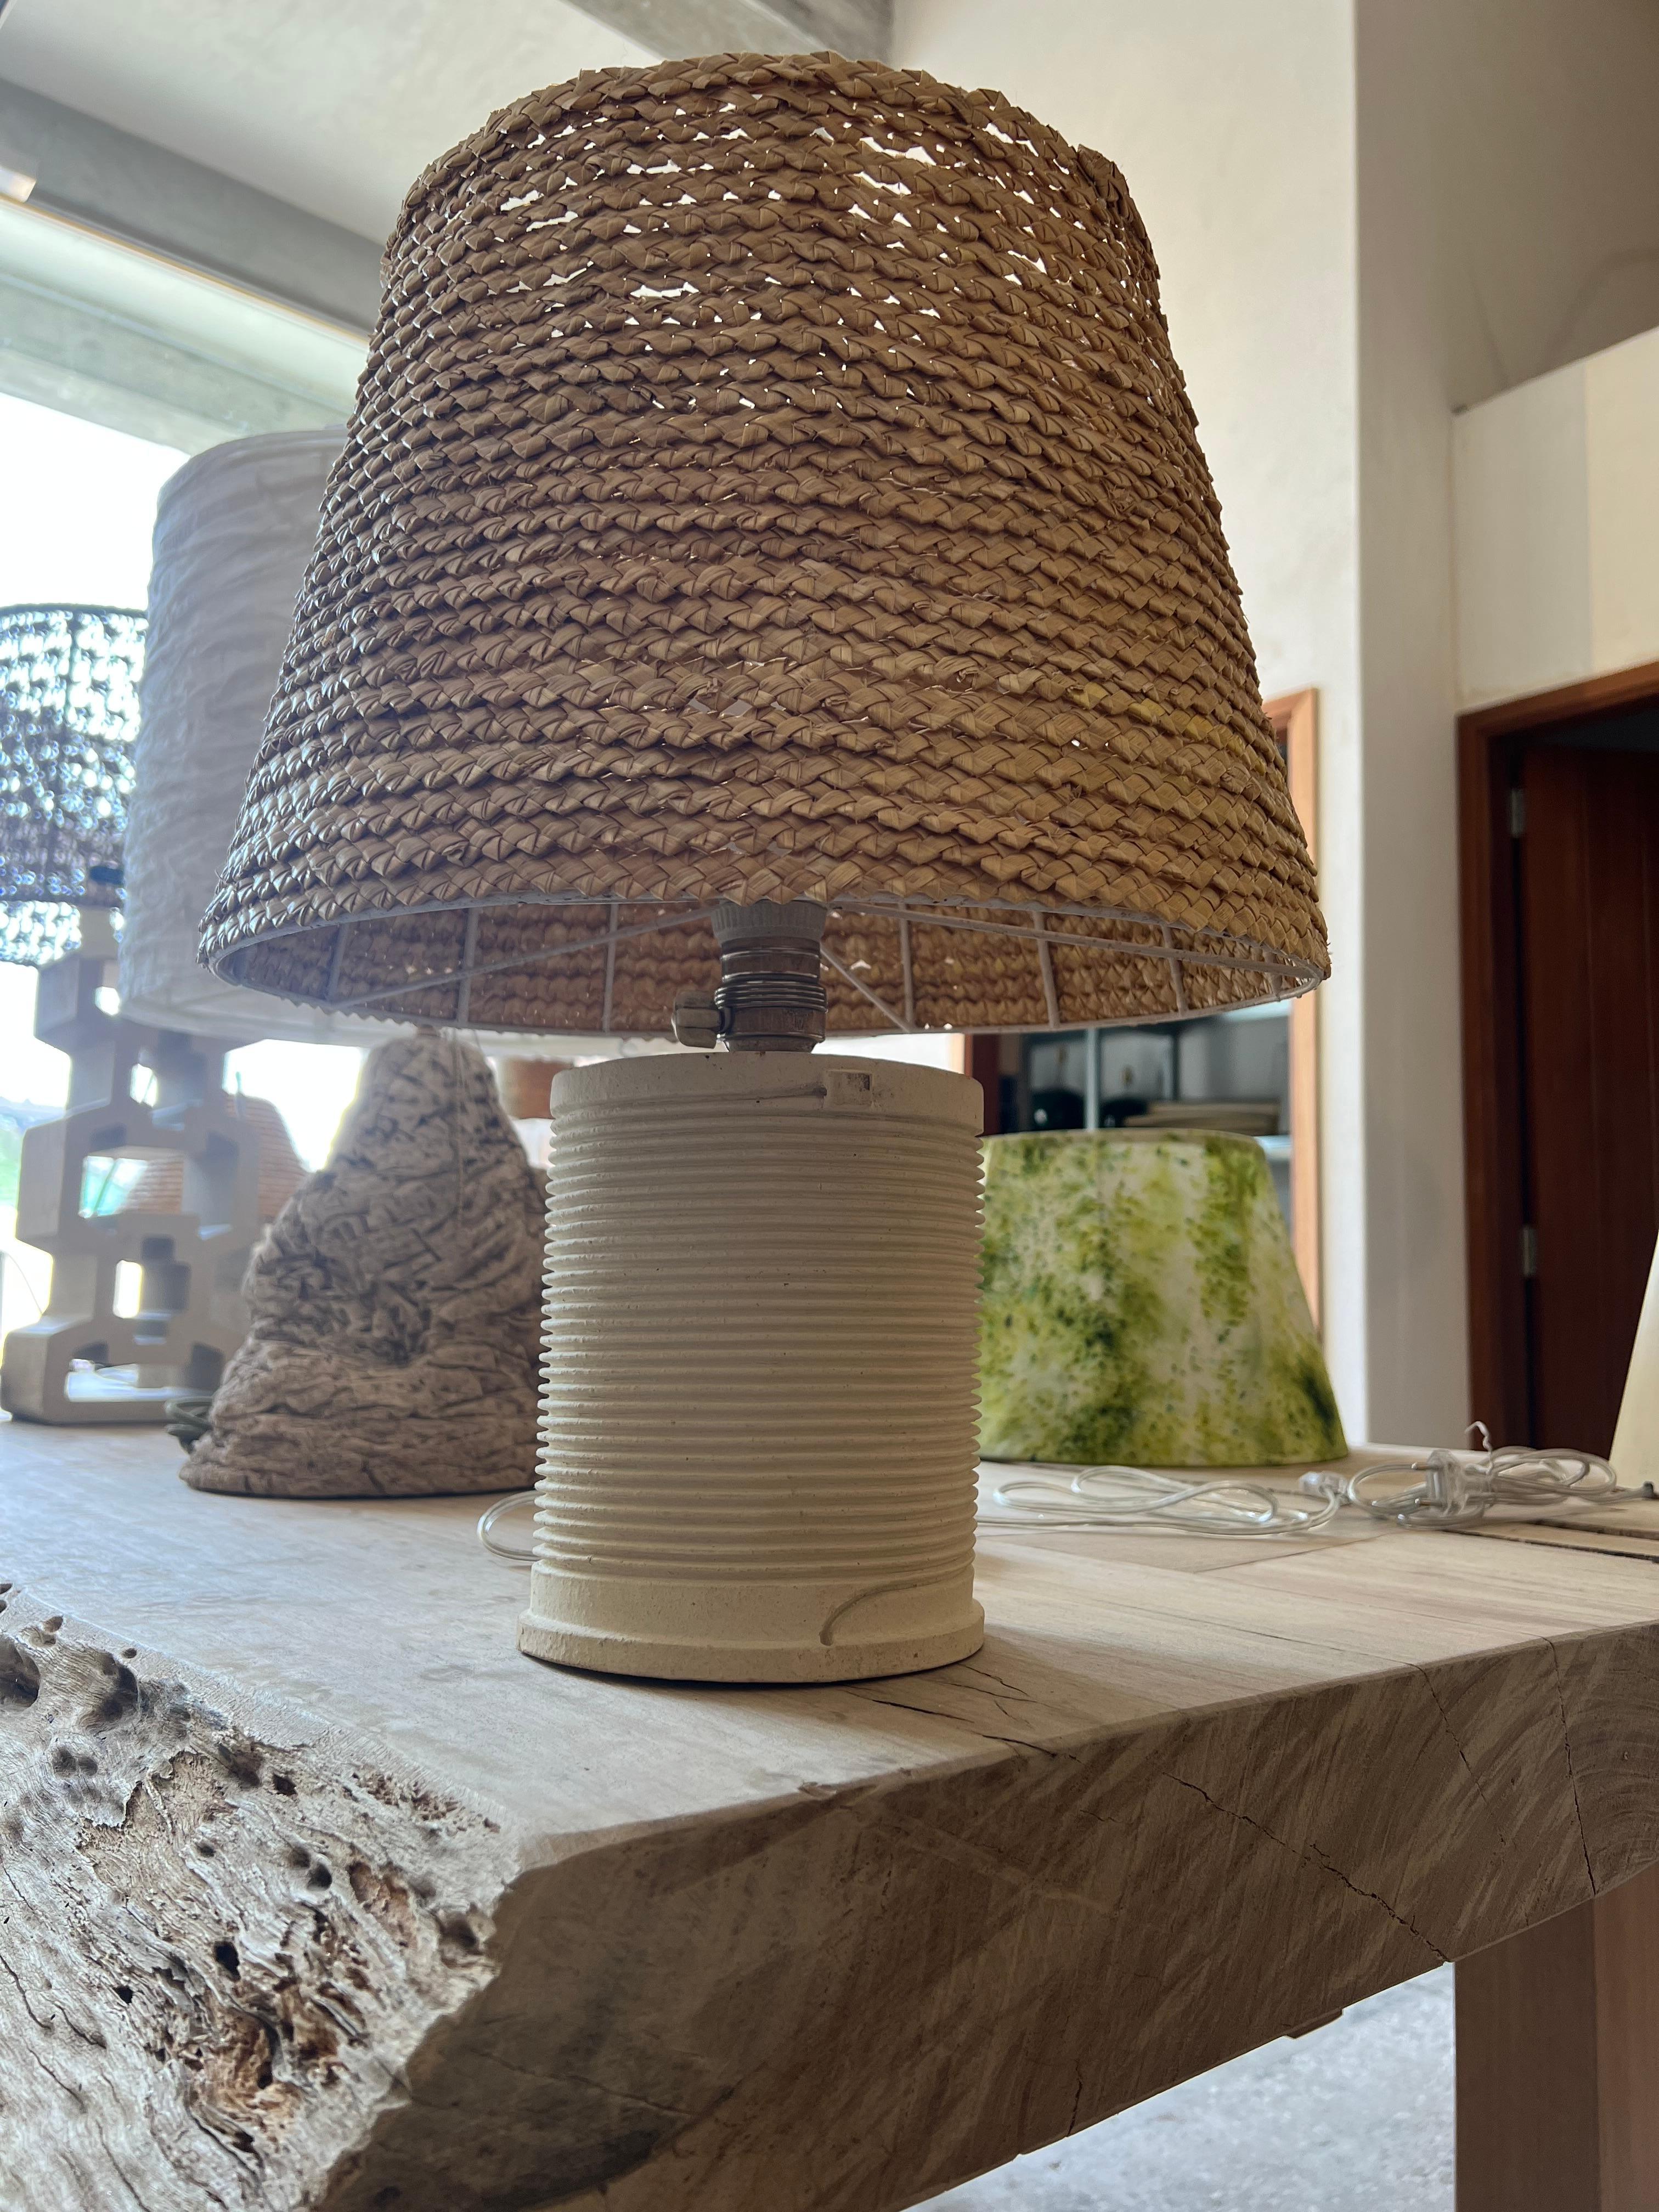 Contemporary Ceramic Handmade Table Side Lamp, White In New Condition For Sale In Carballo, ES